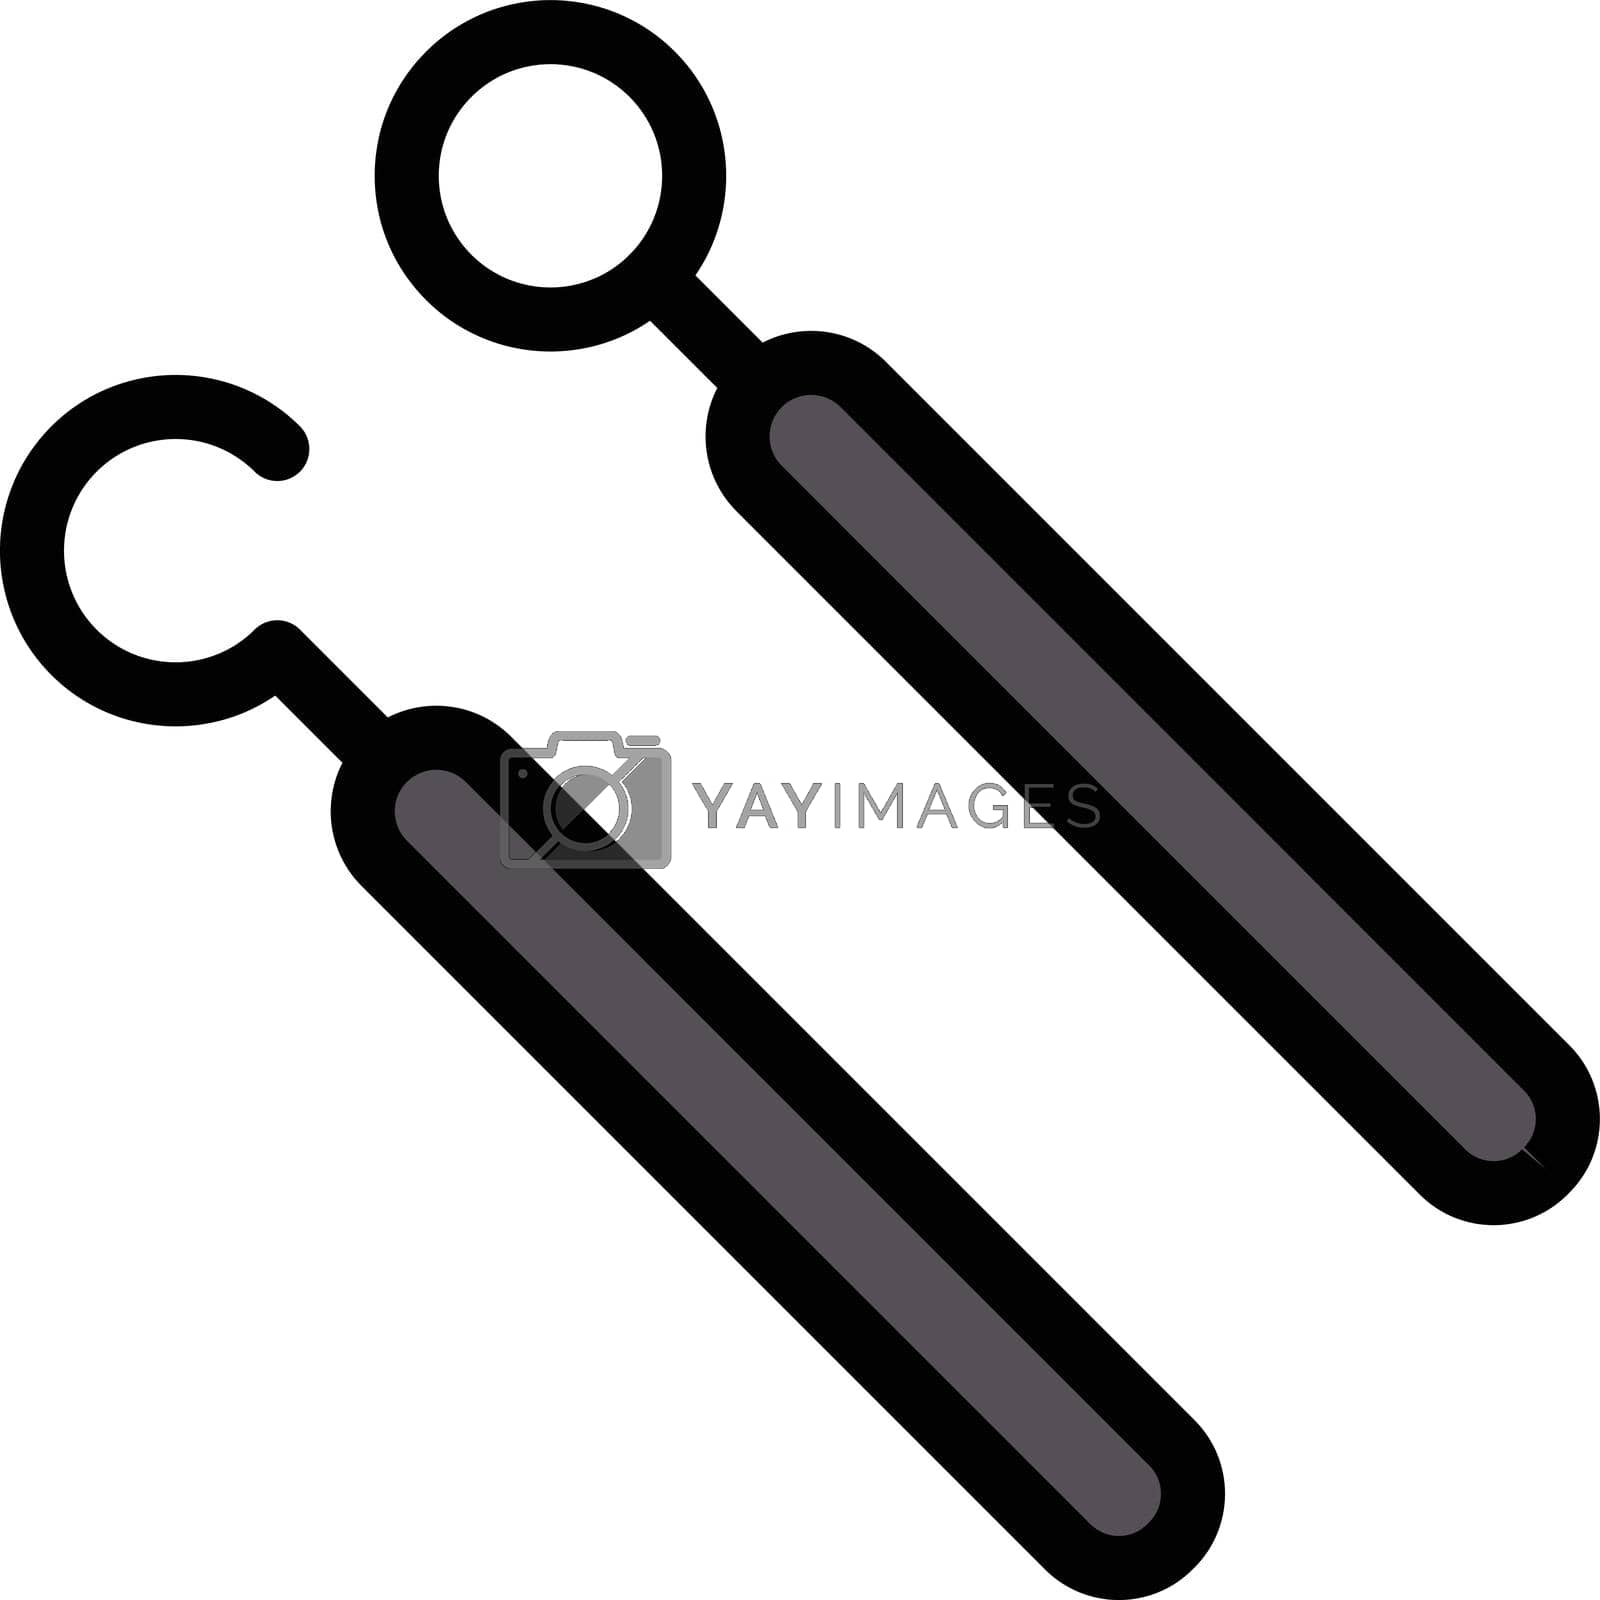 Royalty free image of dental tool by vectorstall